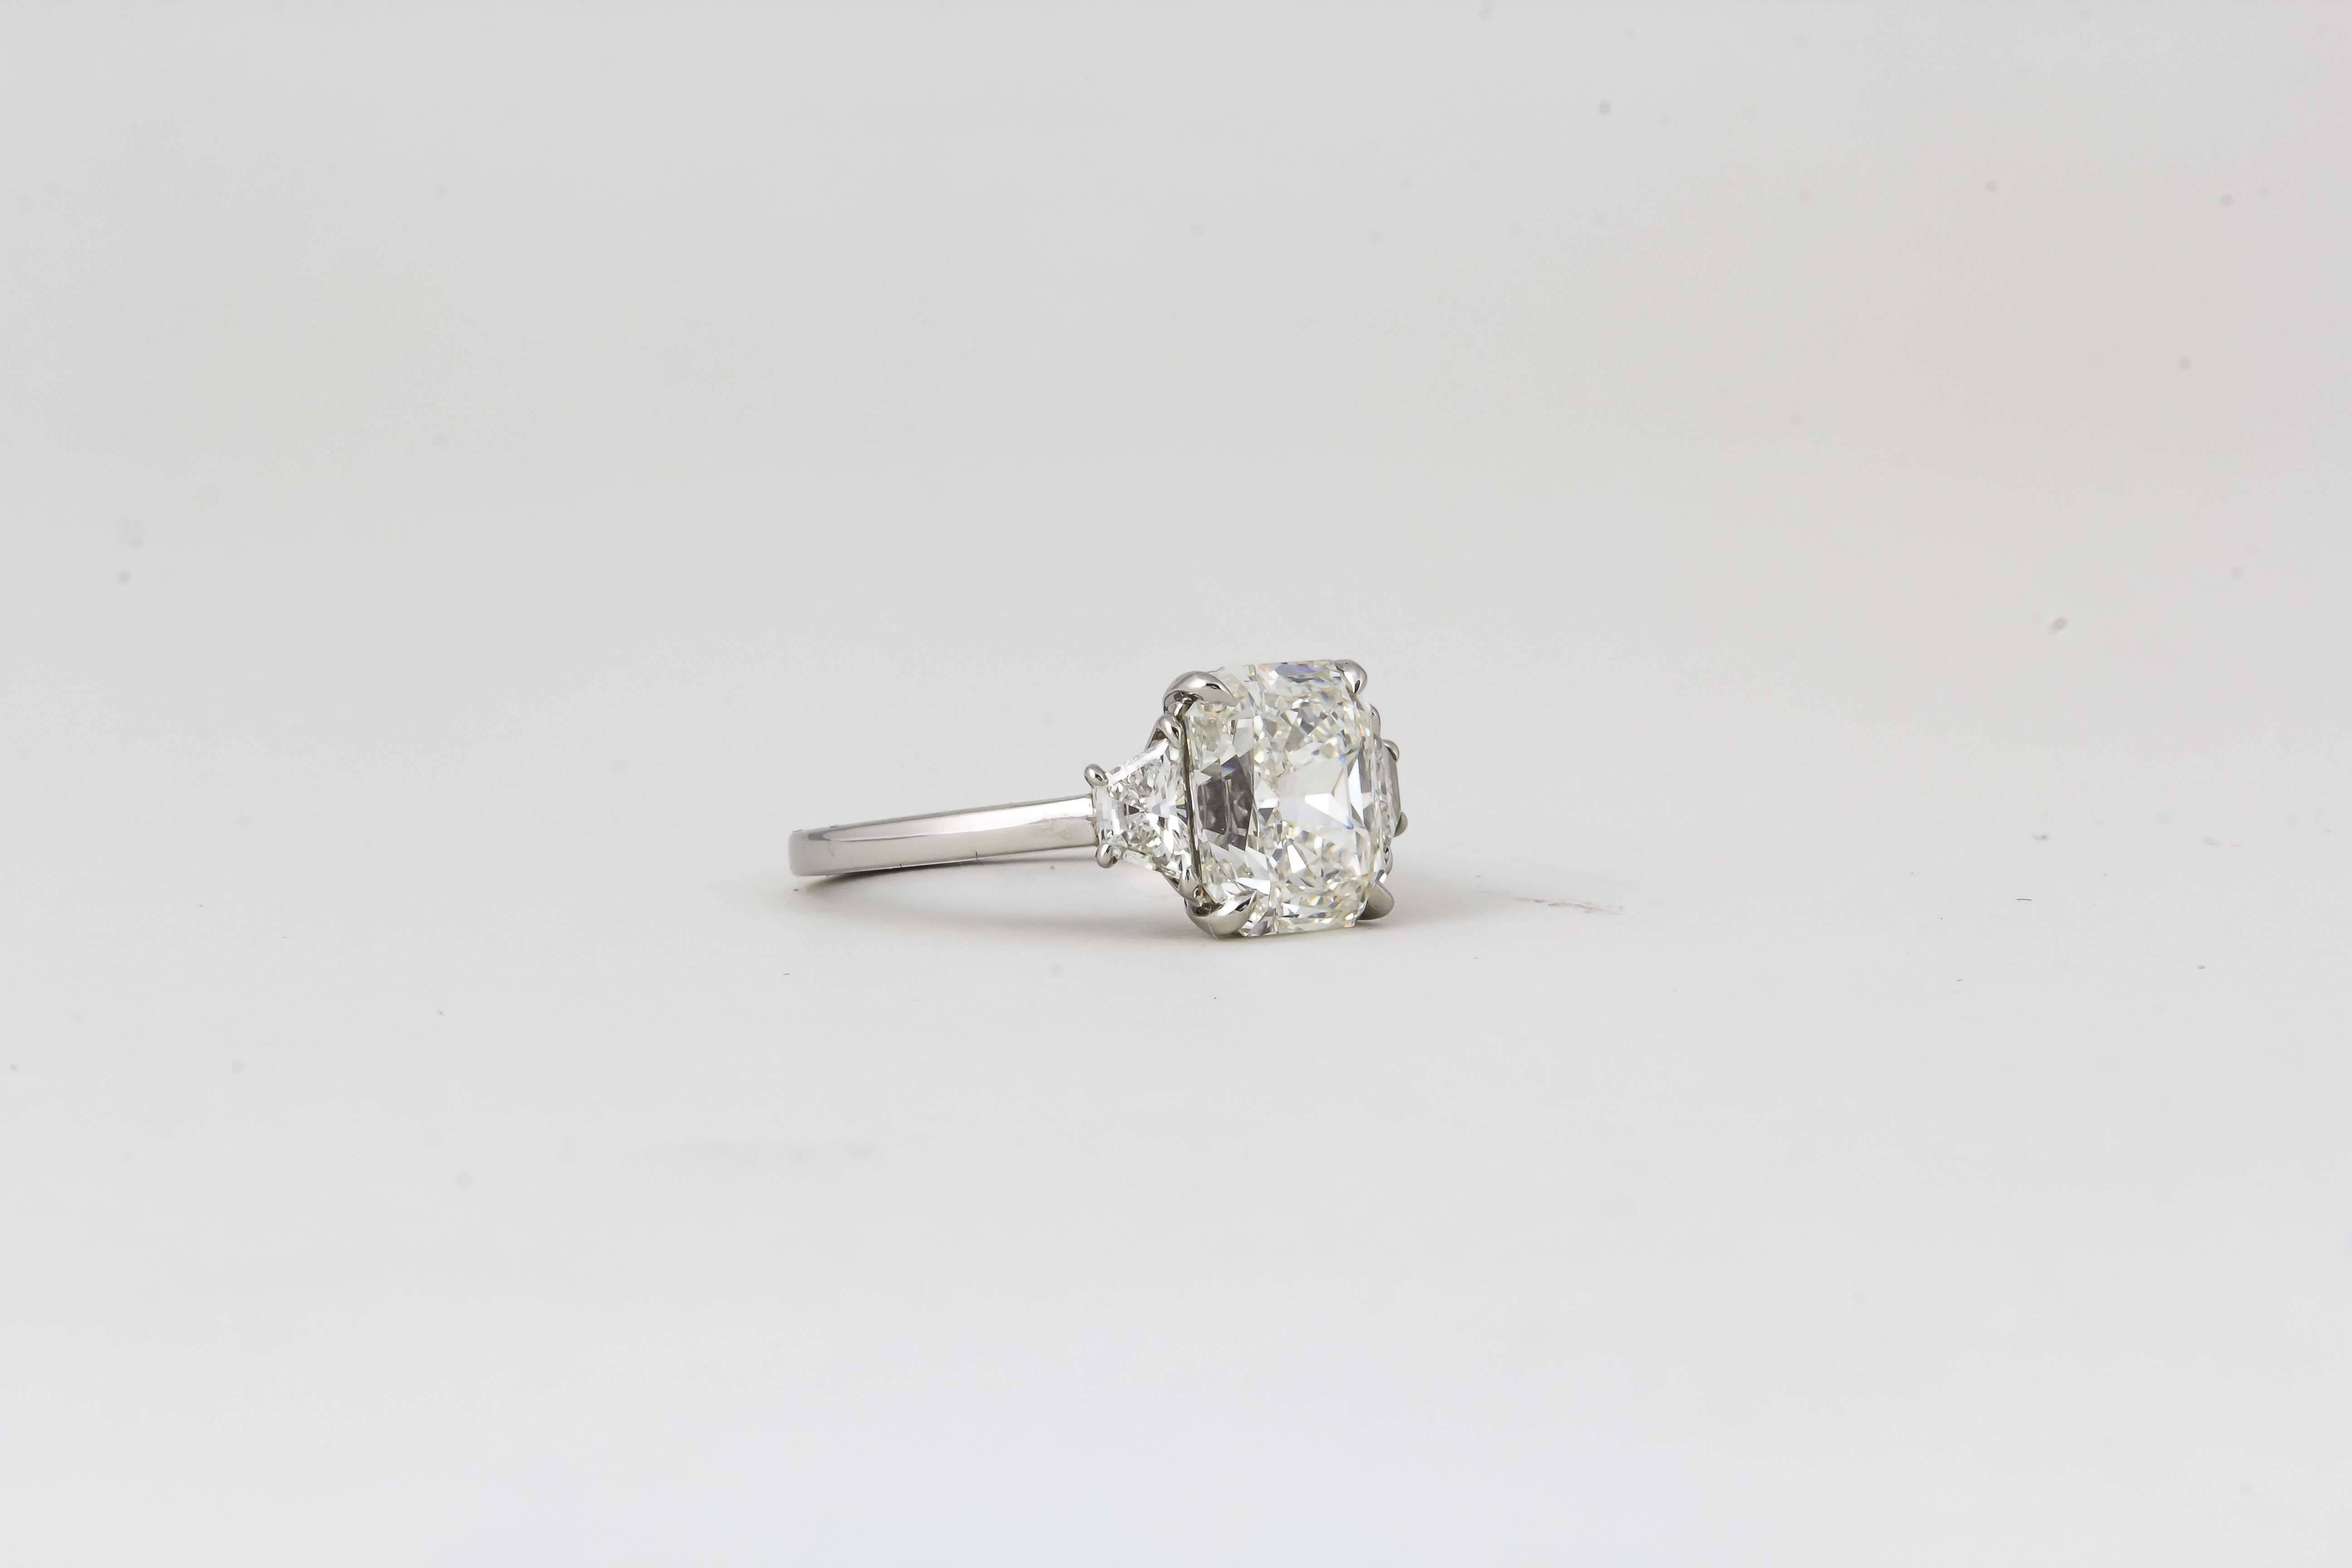 

A beautiful radiant cut diamond set in a timeless custom made mounting. 

3.18 carat center H VS1 Radiant cut diamond set with matching trapezoid cut diamonds weighing .37 cts. Set in a custom platinum mounting. 

This ring is currently a size